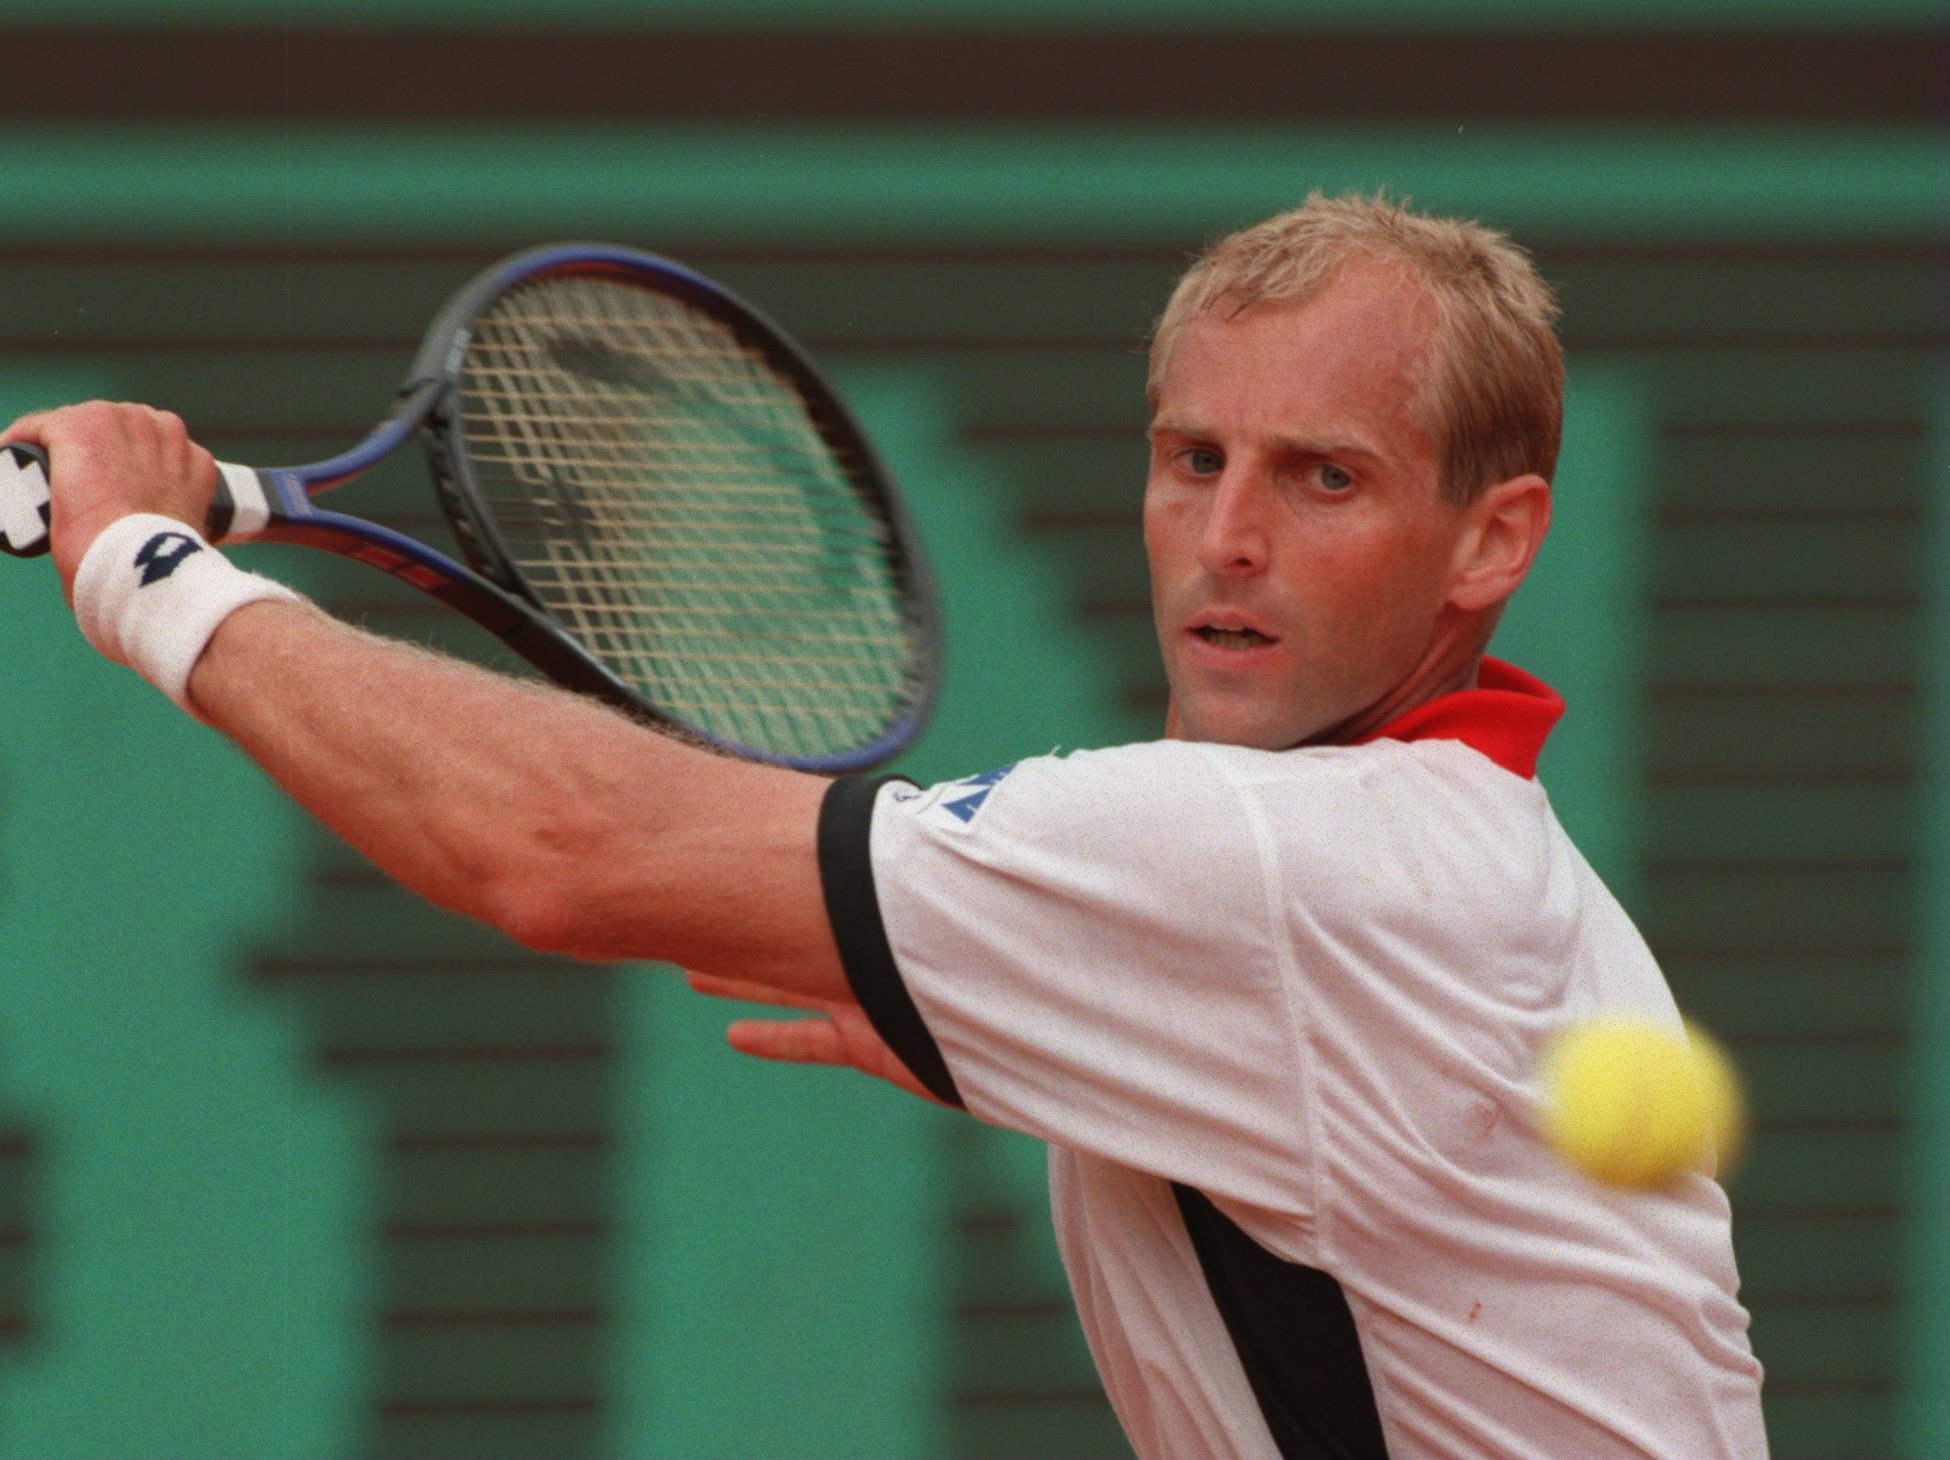 11 JUN 1995:  THOMAS MUSTER OF AUSTRIA HITS A BACKHAND RETURN AGAINST MICHAEL CHANG OF THE USA IN THE MENS SINGLES FINAL MATCH AT THE FRENCH OPEN TENNIS AT ROLAND GARROS STADIUM, PARIS. MUSTER WON THE MATCH IN THREE SETS 7-5, 6-2, 6-4  TO TAKE THE FRENCHO